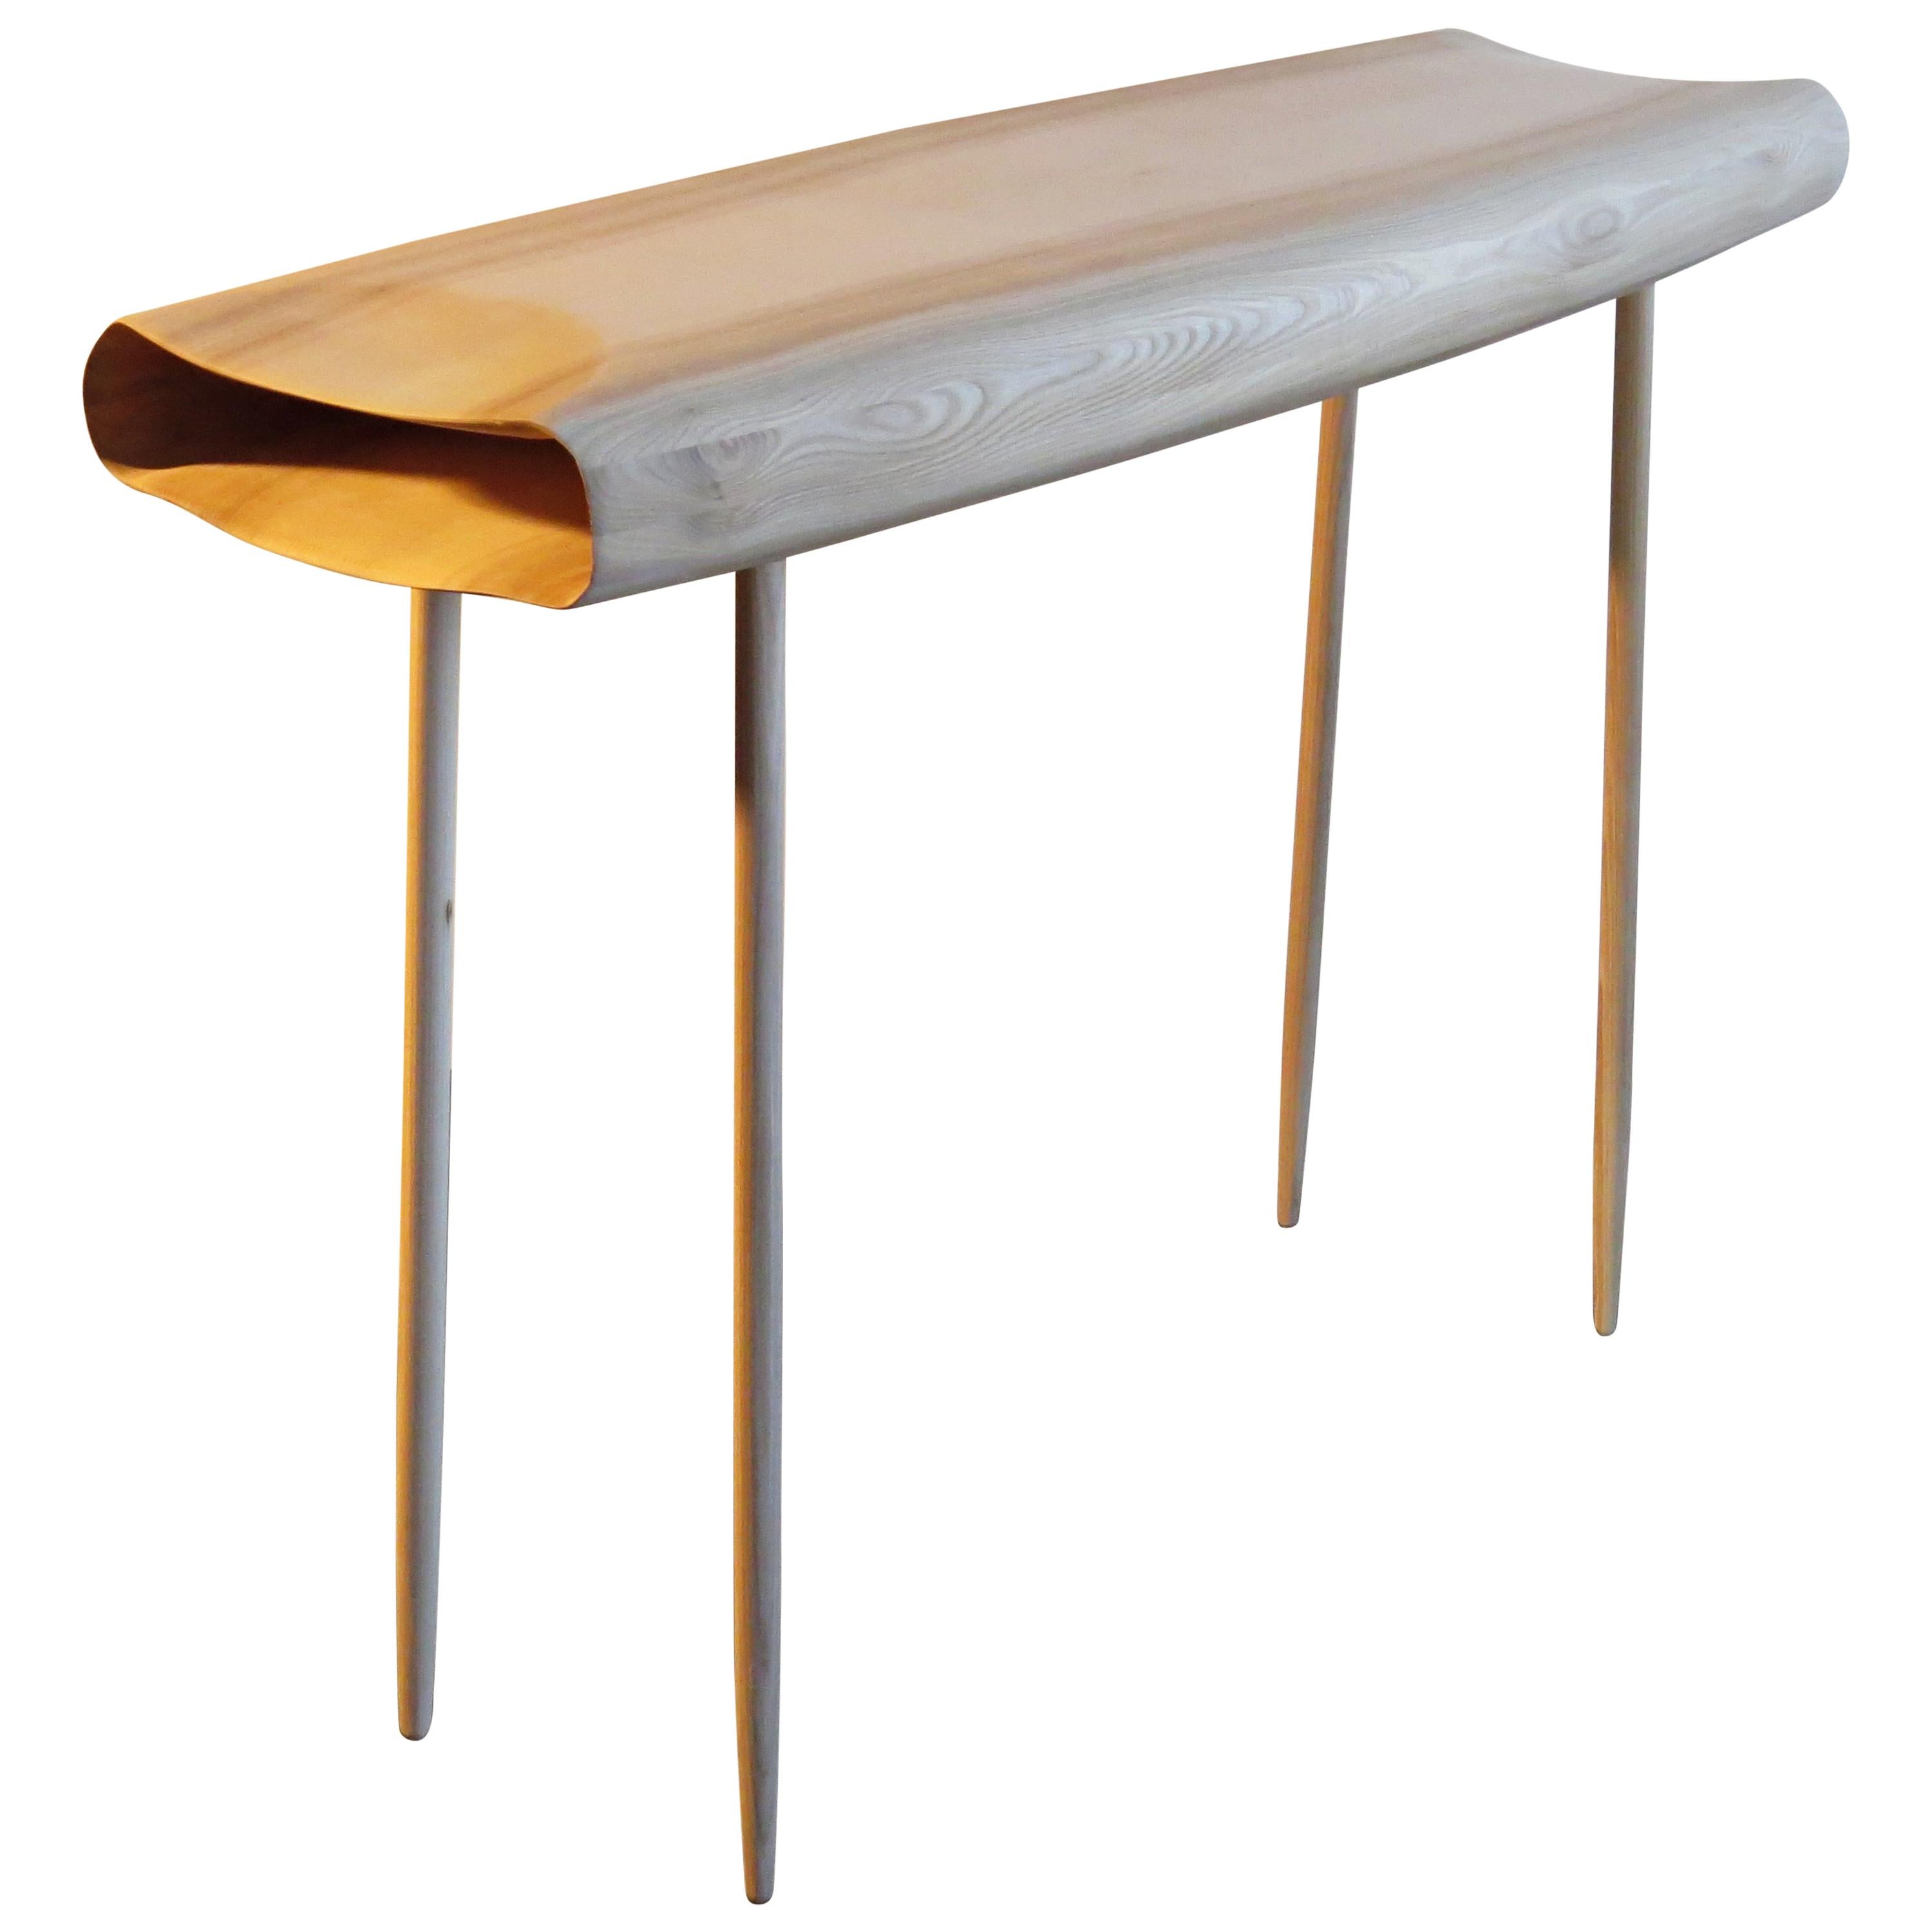 Console "Cloud" Solid Wood, Organic Design, Made to Measure in Germany For Sale